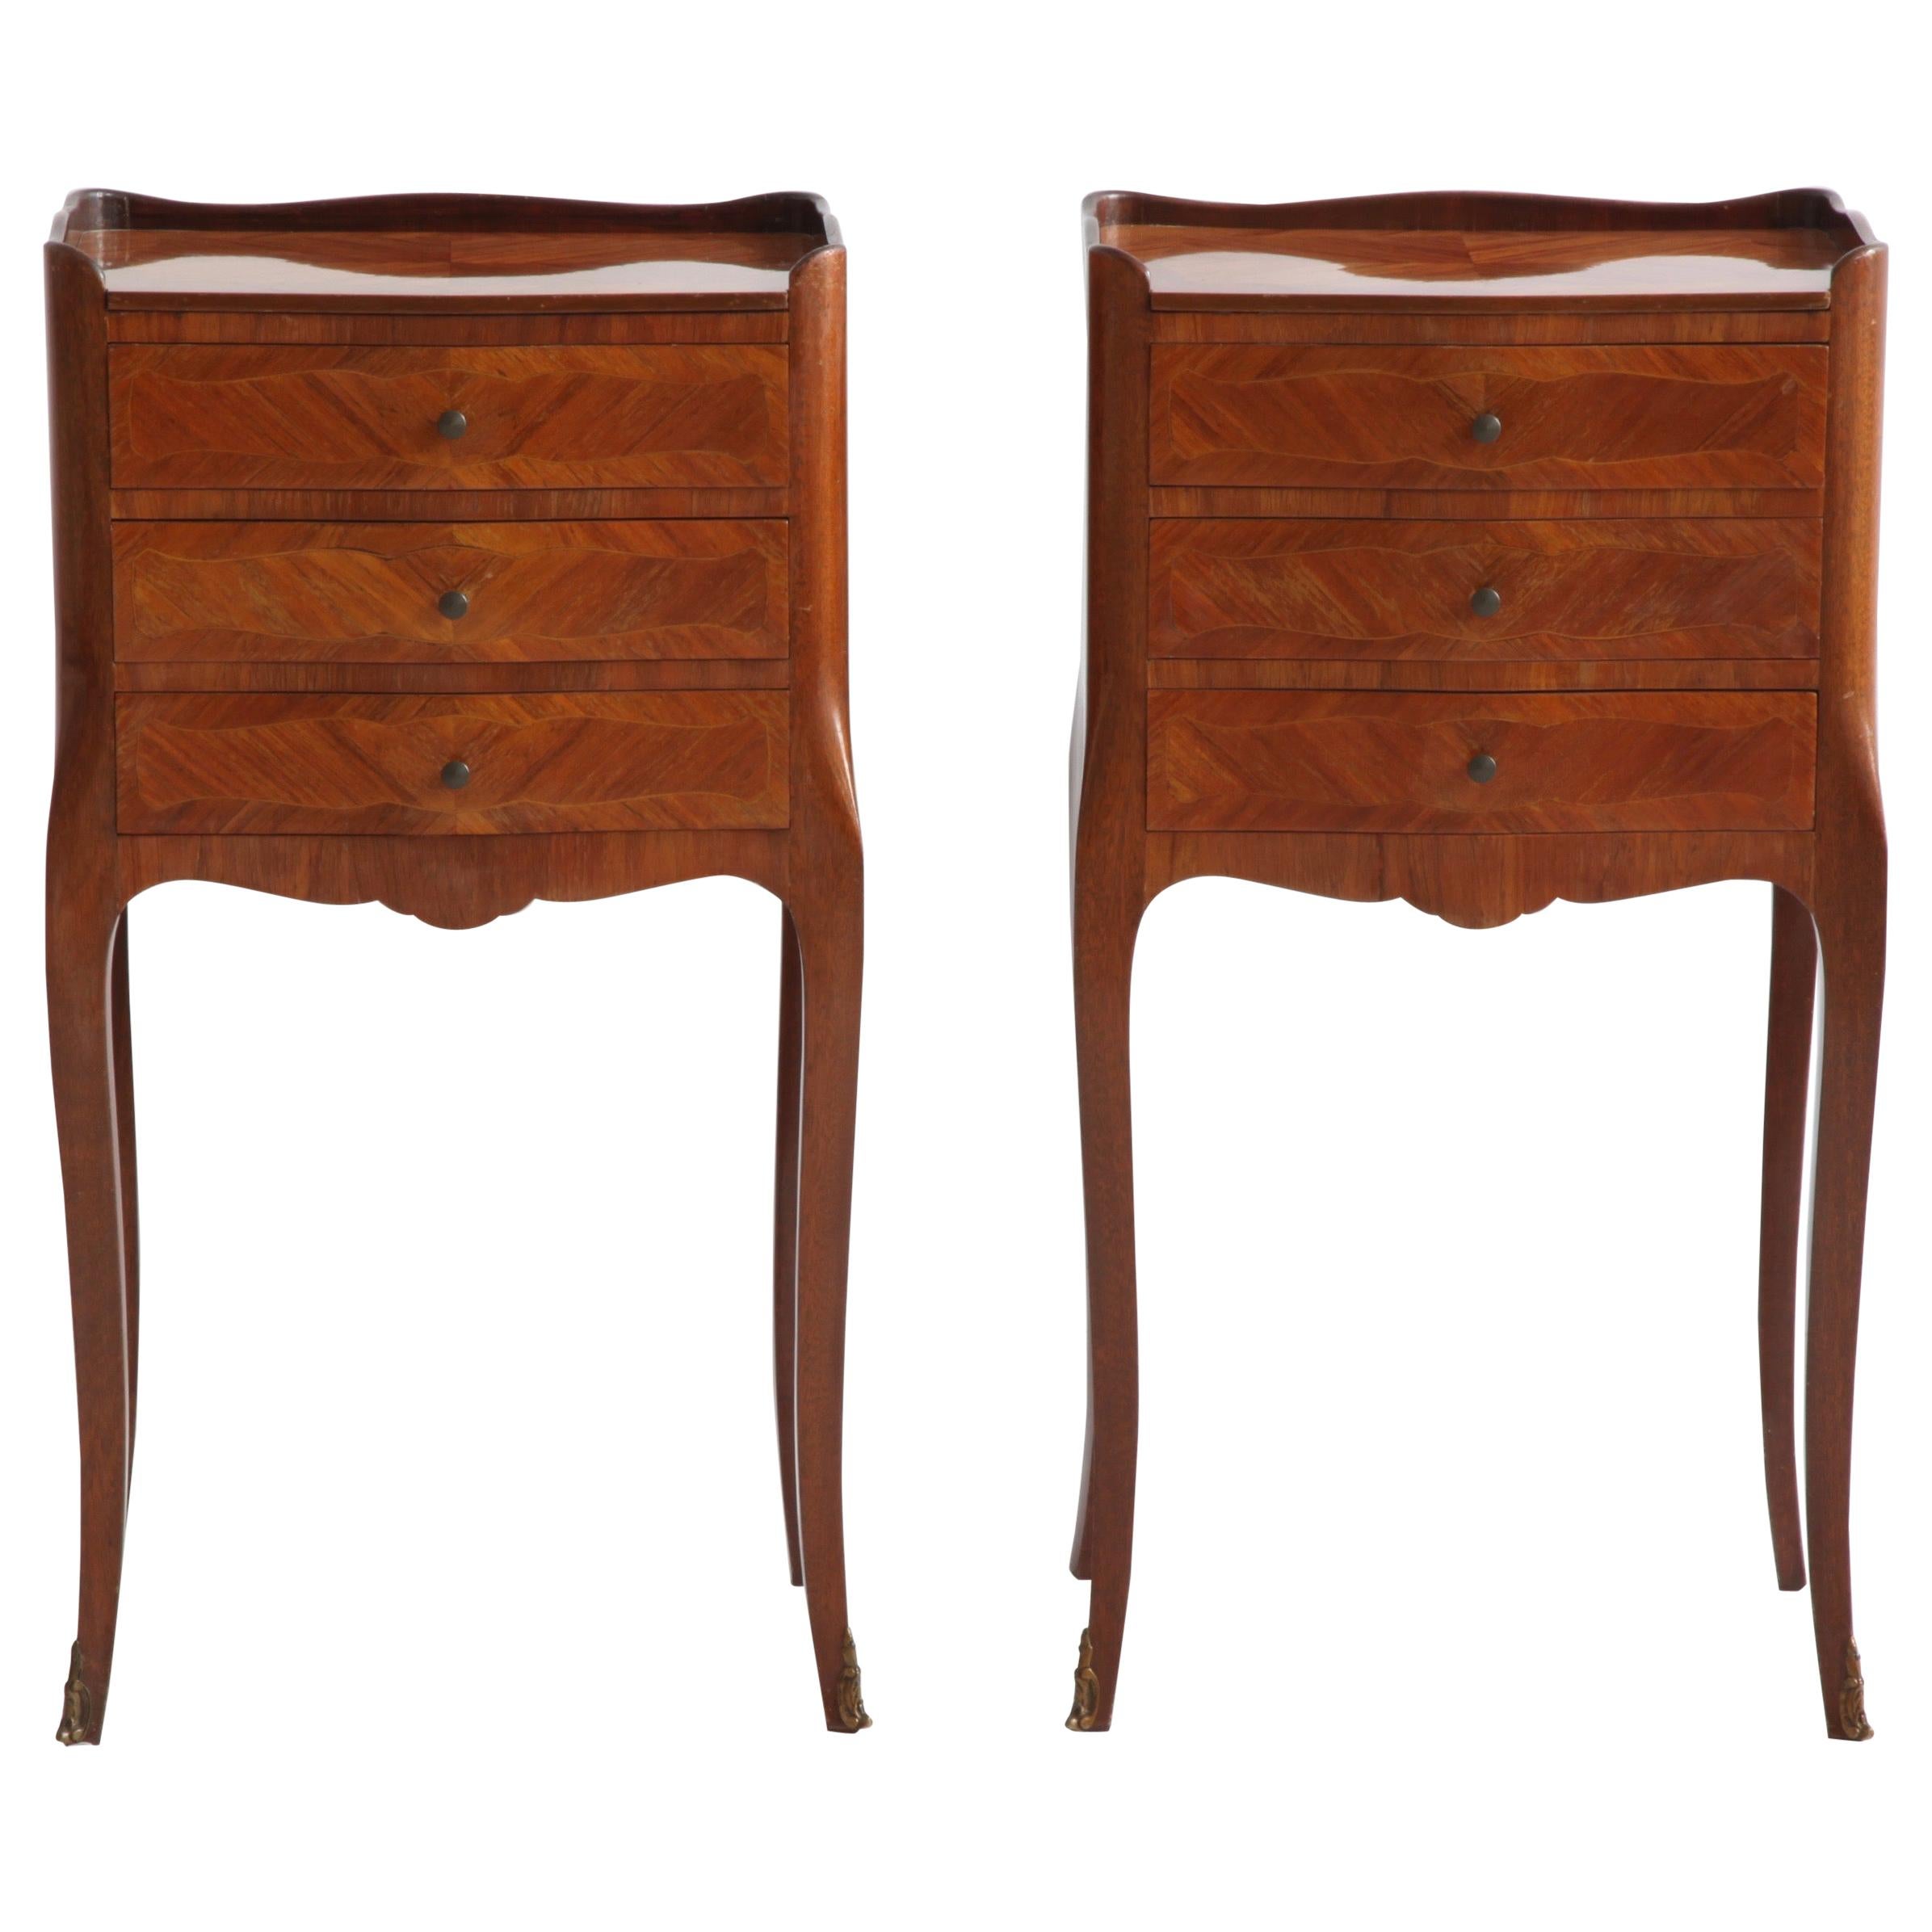 Pair of Marquetry Bedside Tables Louis XV Style